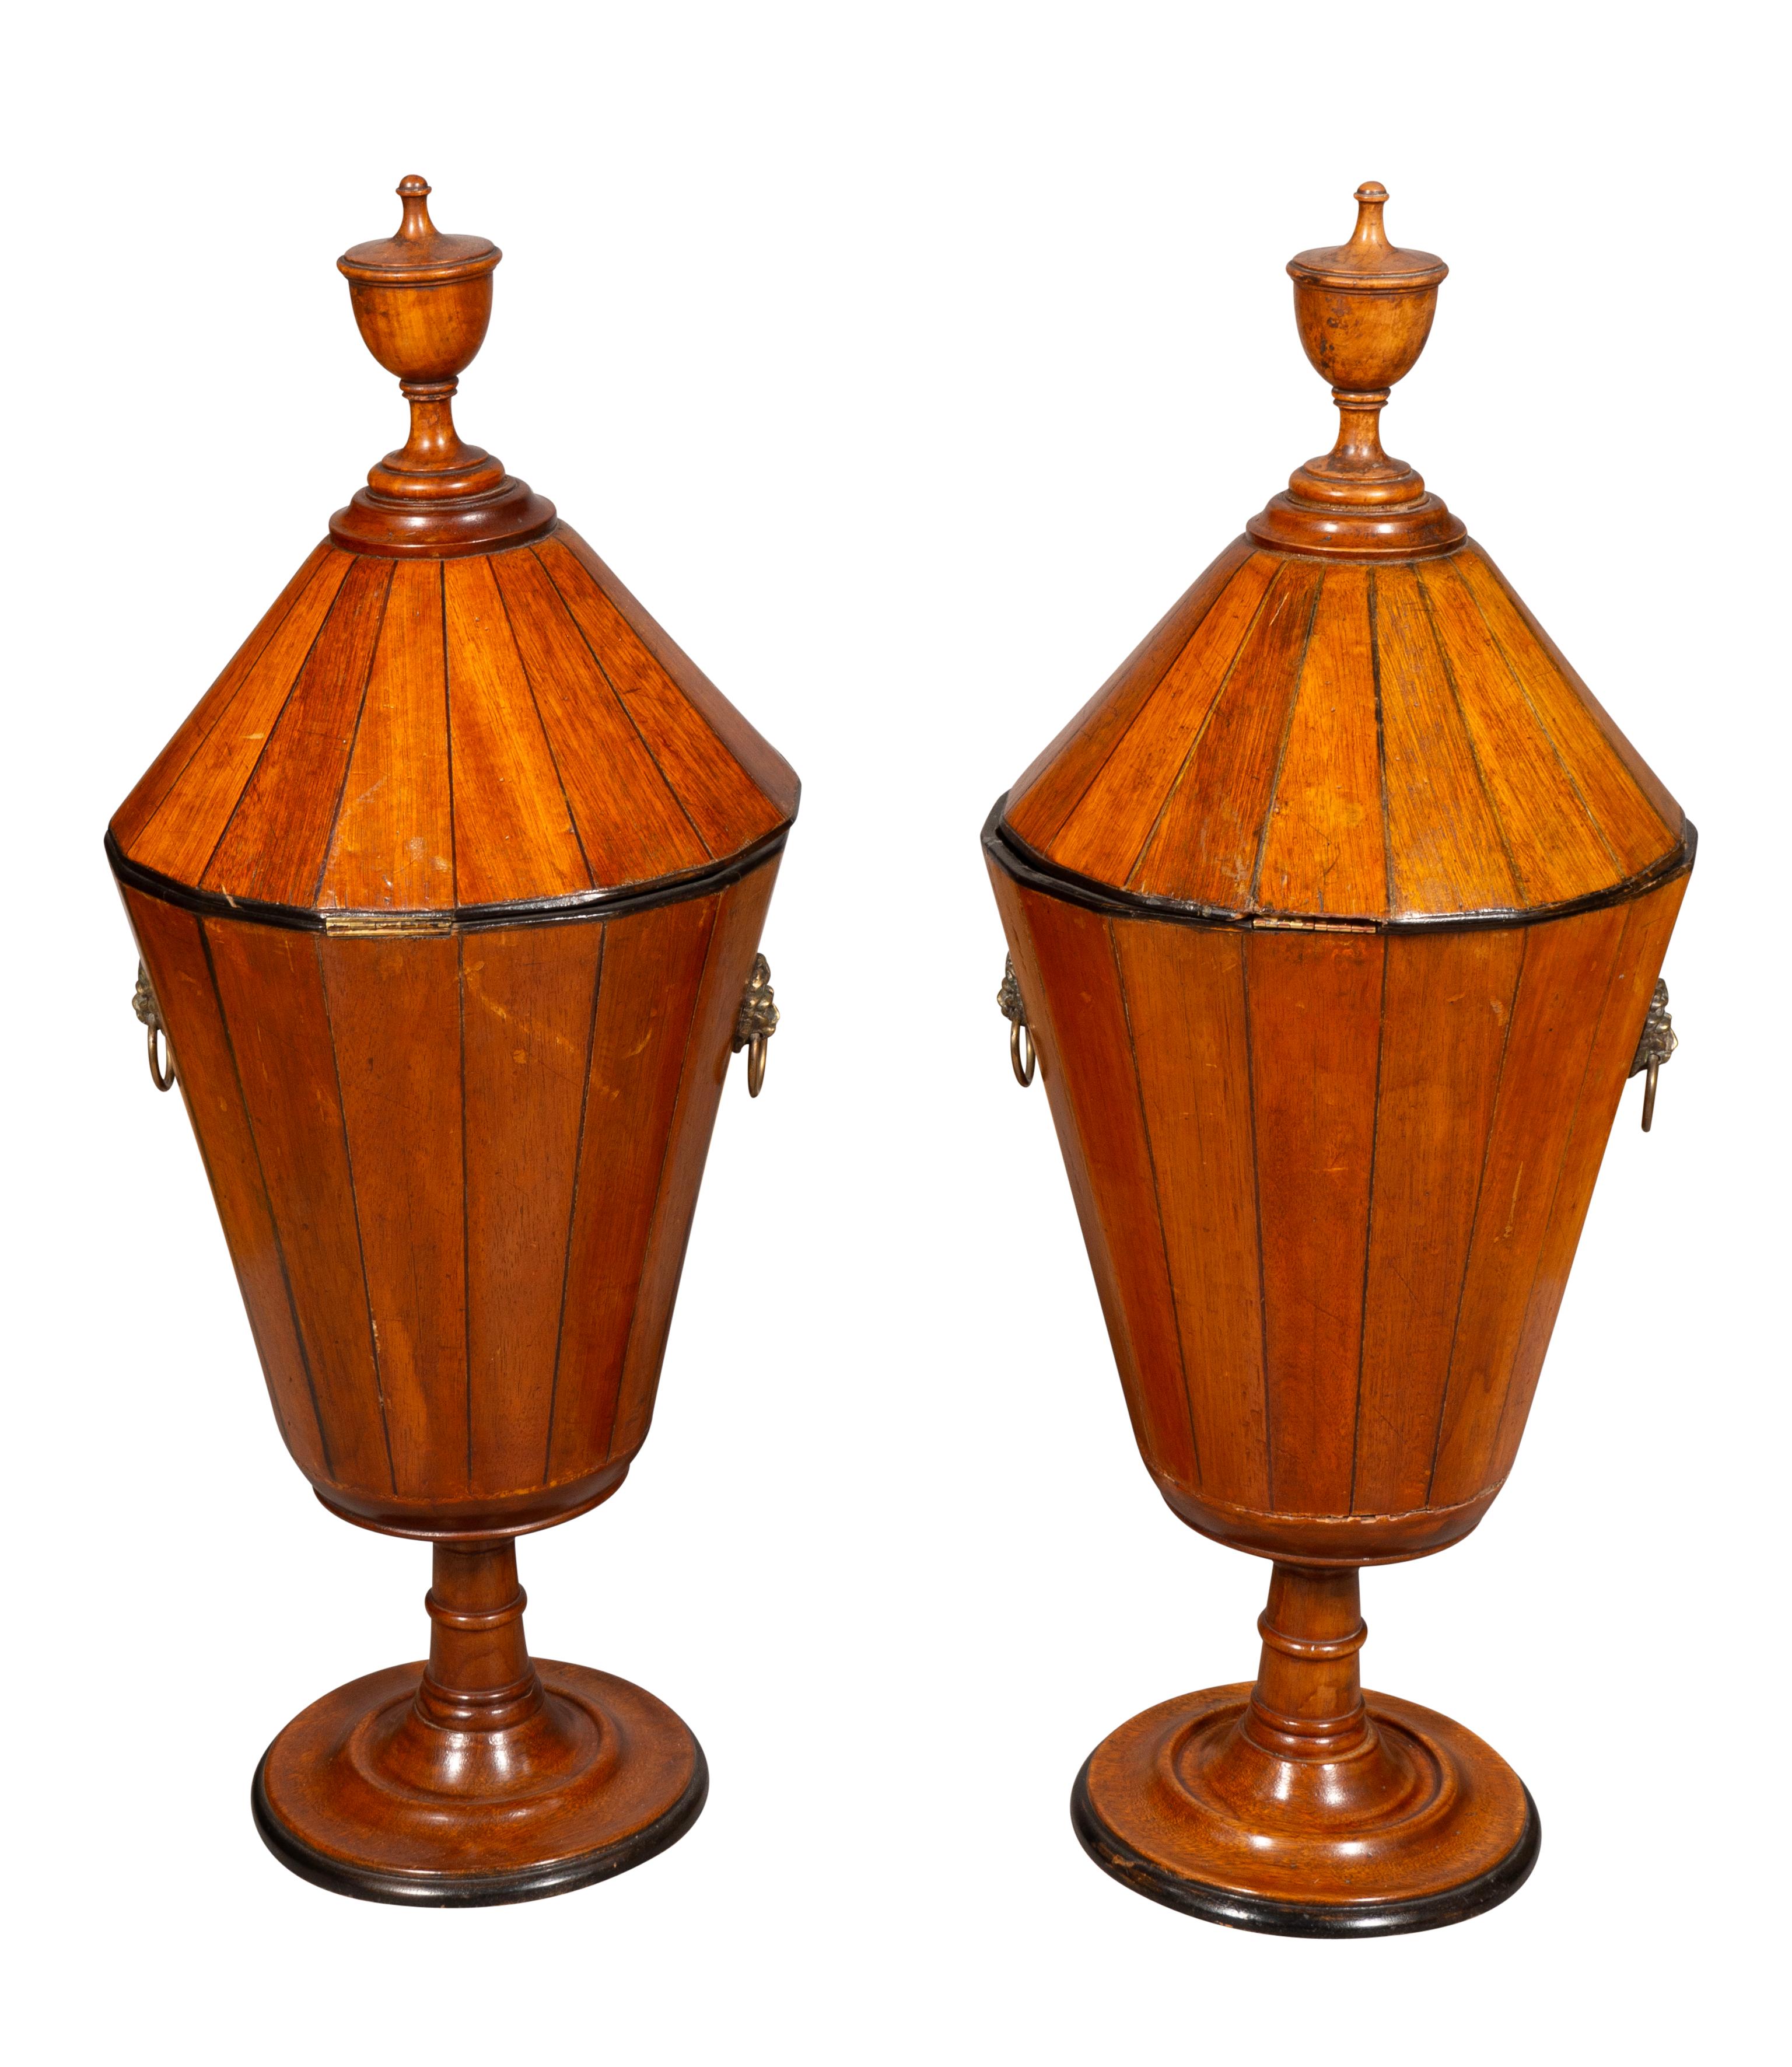 Pair Of Regency Urn Form Oak Wine Coolers In Good Condition For Sale In Essex, MA